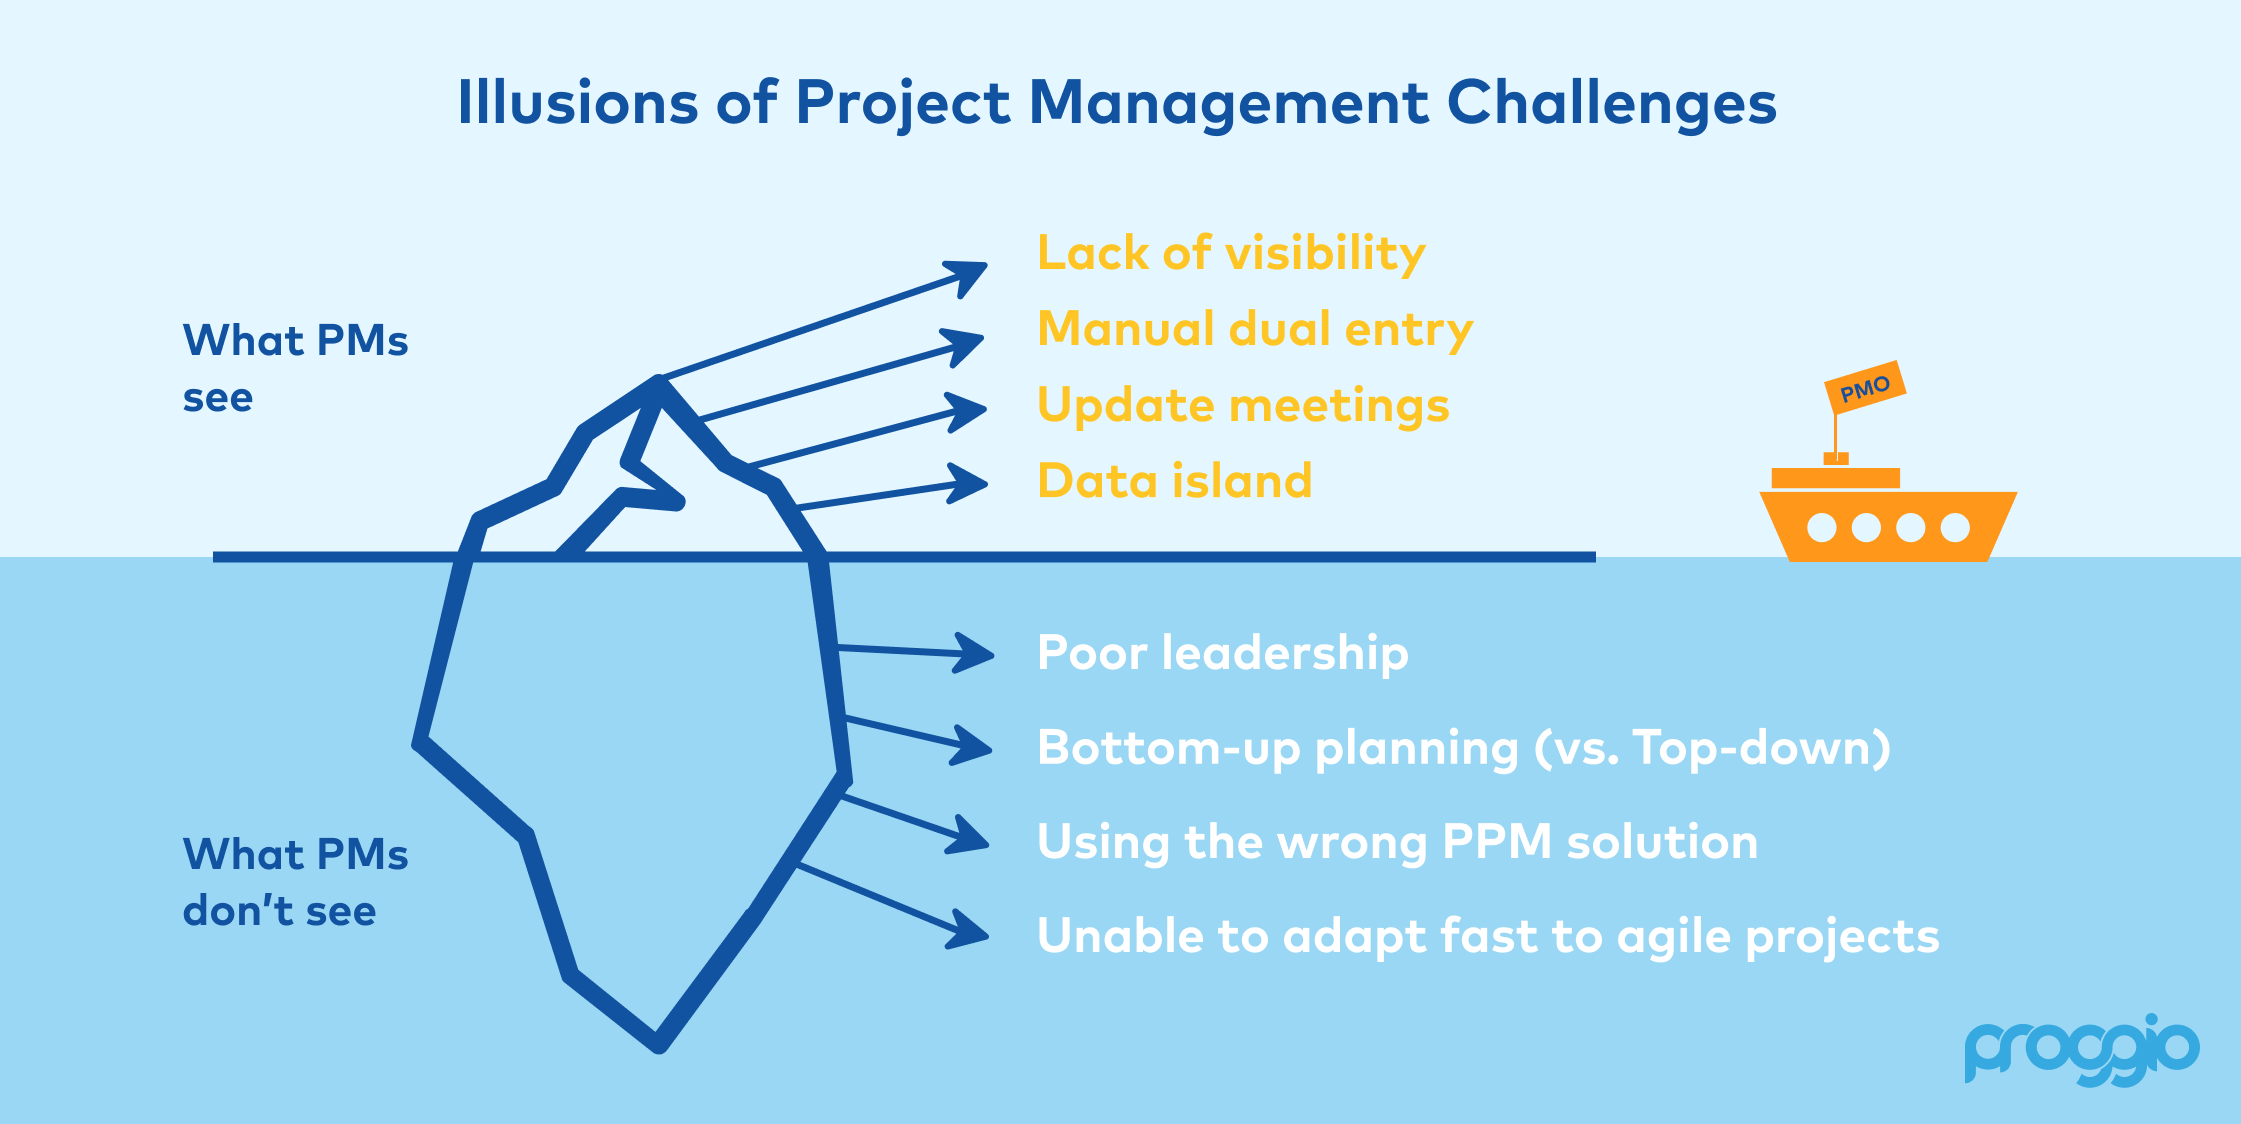 project management challenges: what project managers see vs. what they don't see